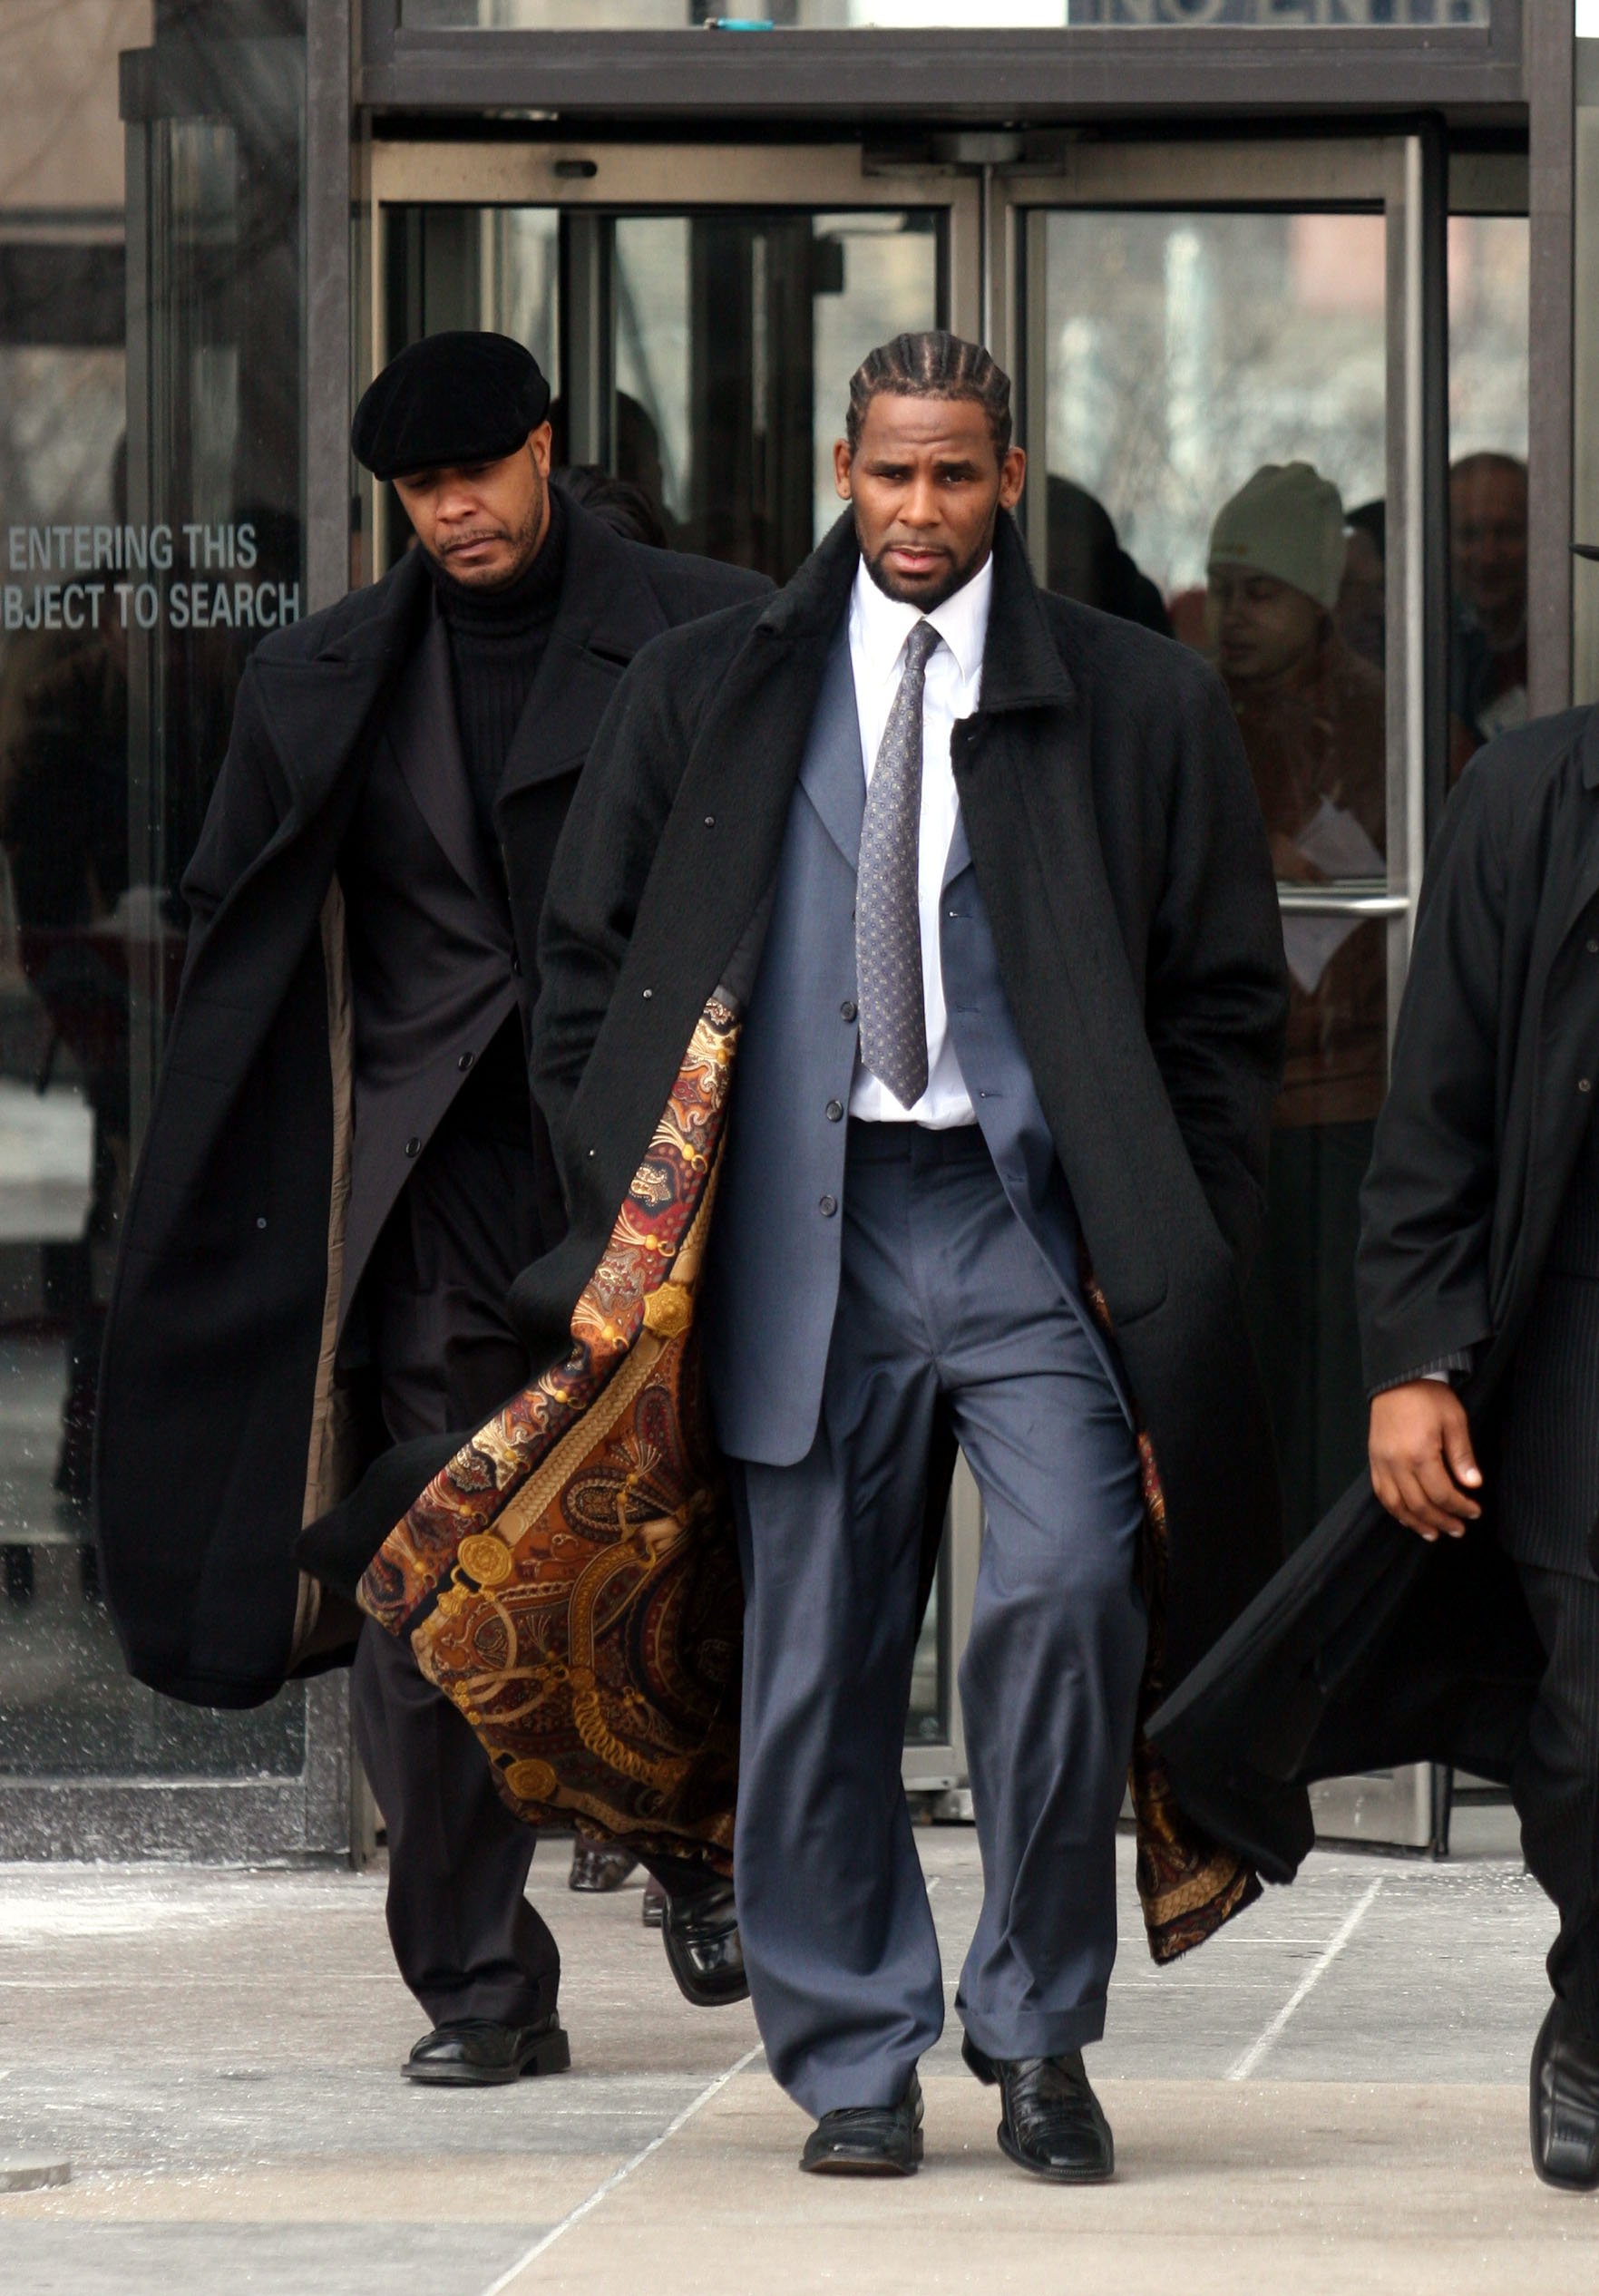 R. Kelly leaves Cook County Court after his court hearings on Dec. 20, 2007 in Chicago | Photo: Getty Images